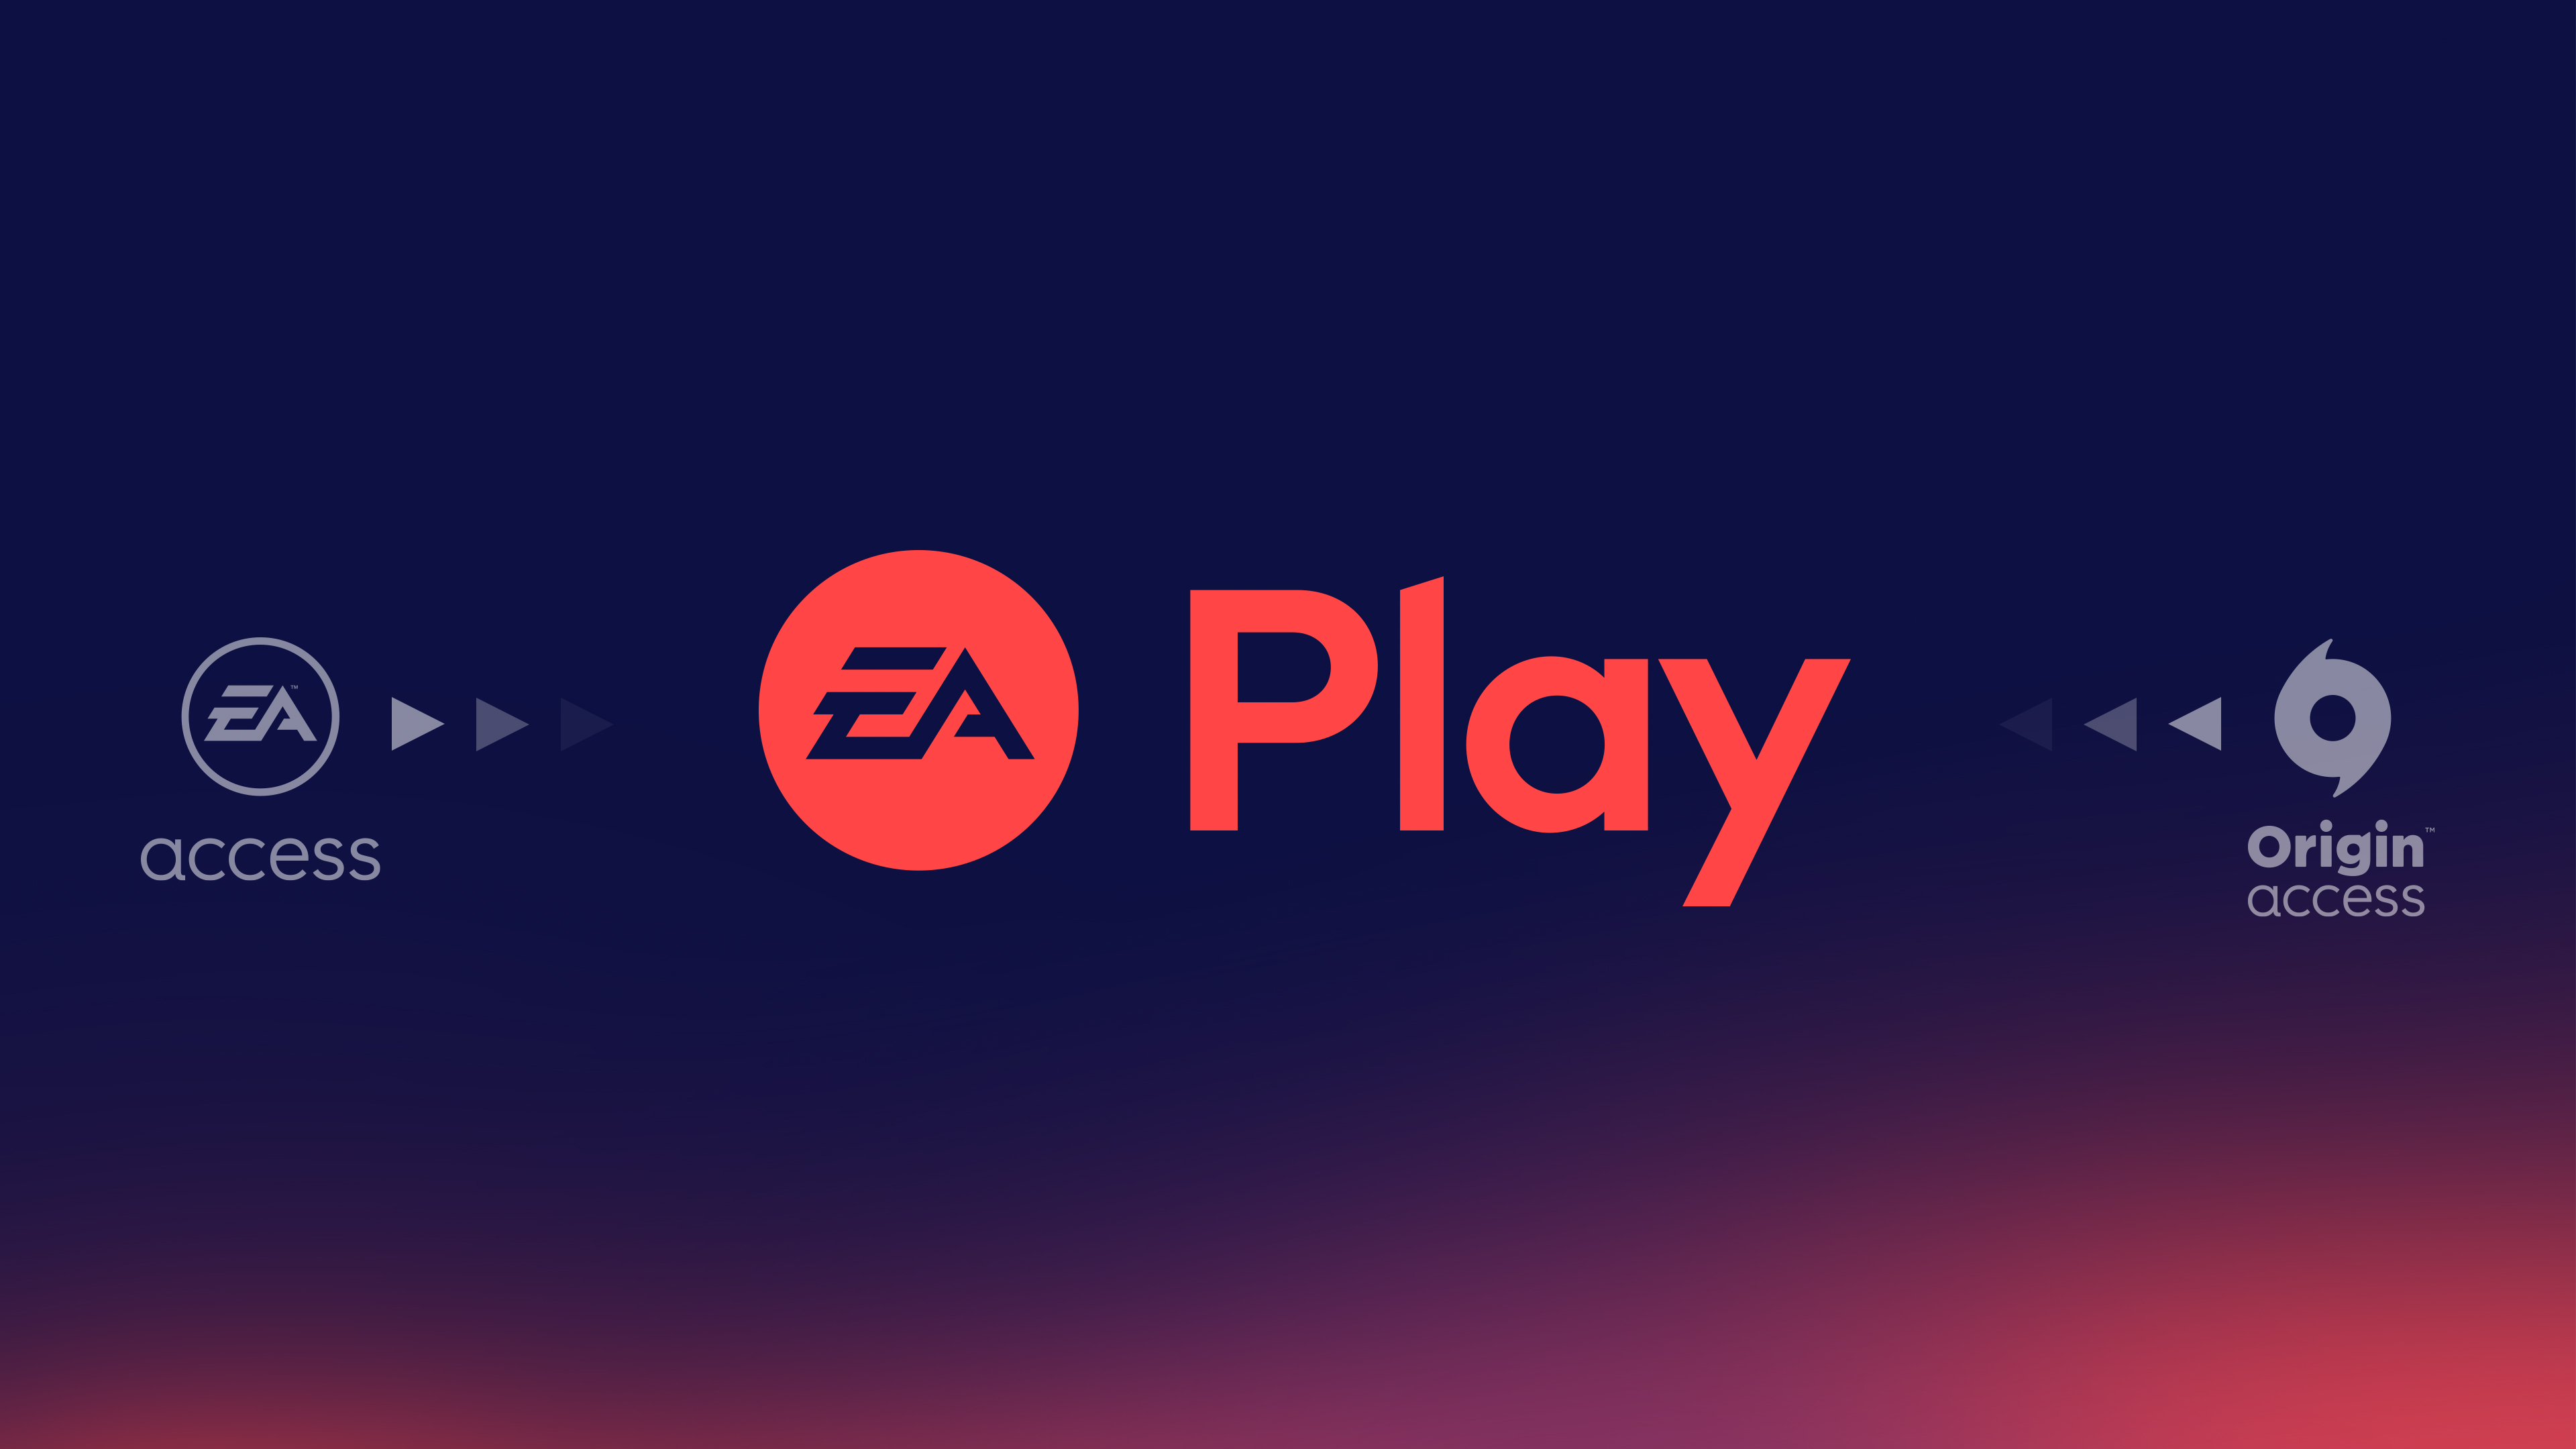 eaplay download